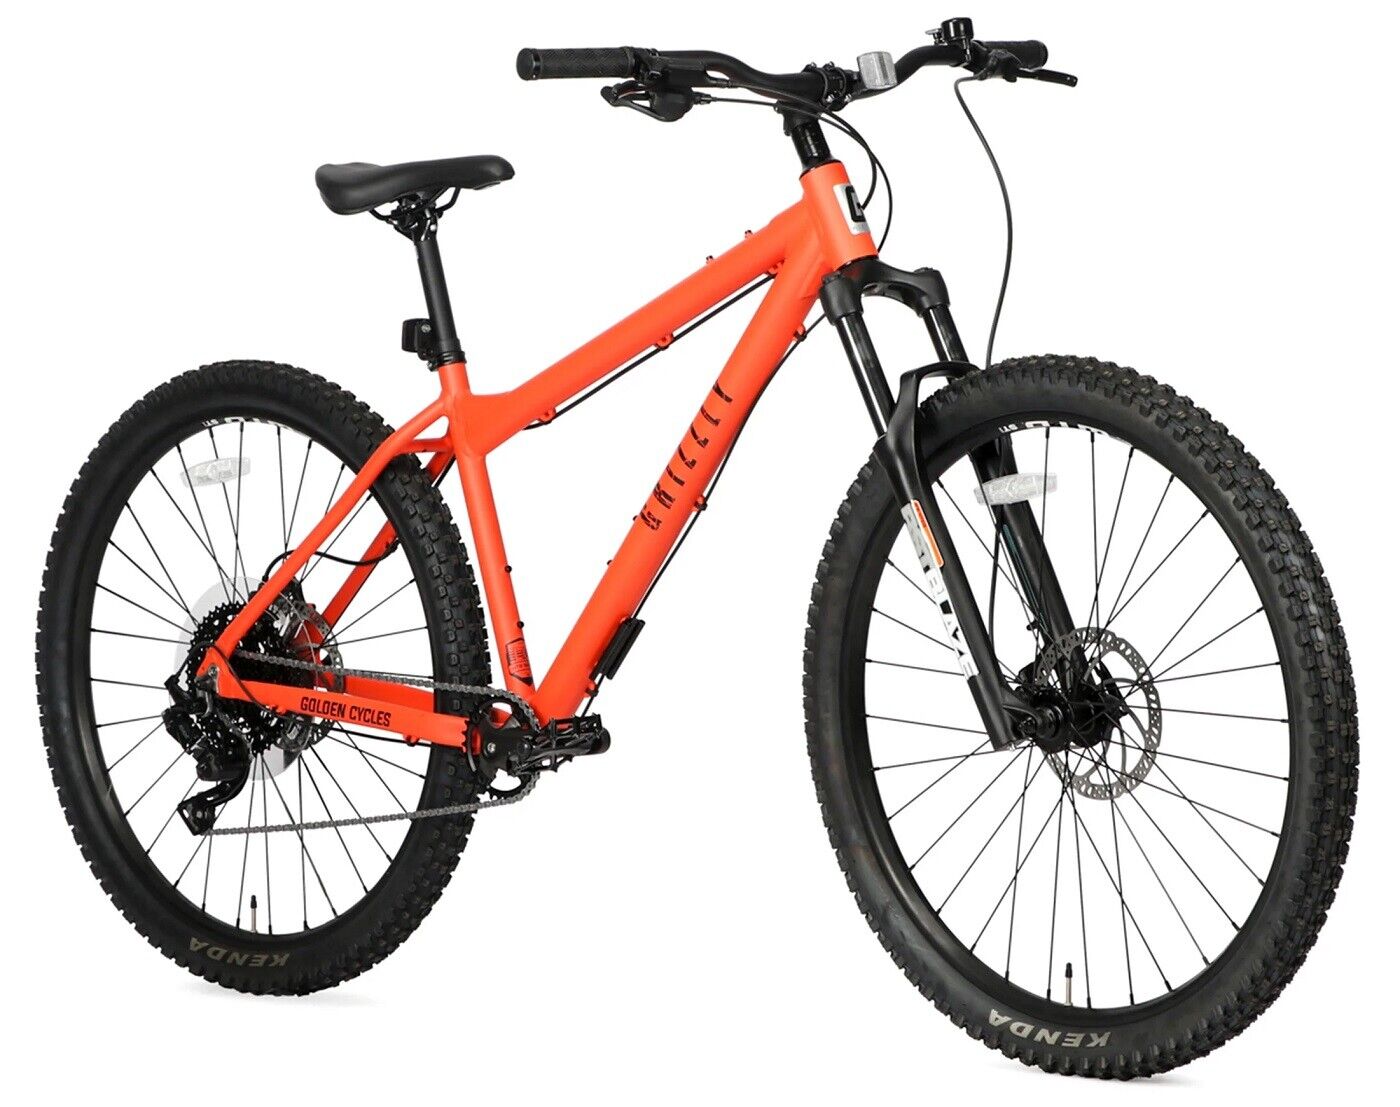 Golden Cycles Grizzly MTB 29" Aluminum Frame 9 Speed Bicycle Bike Orange NEW